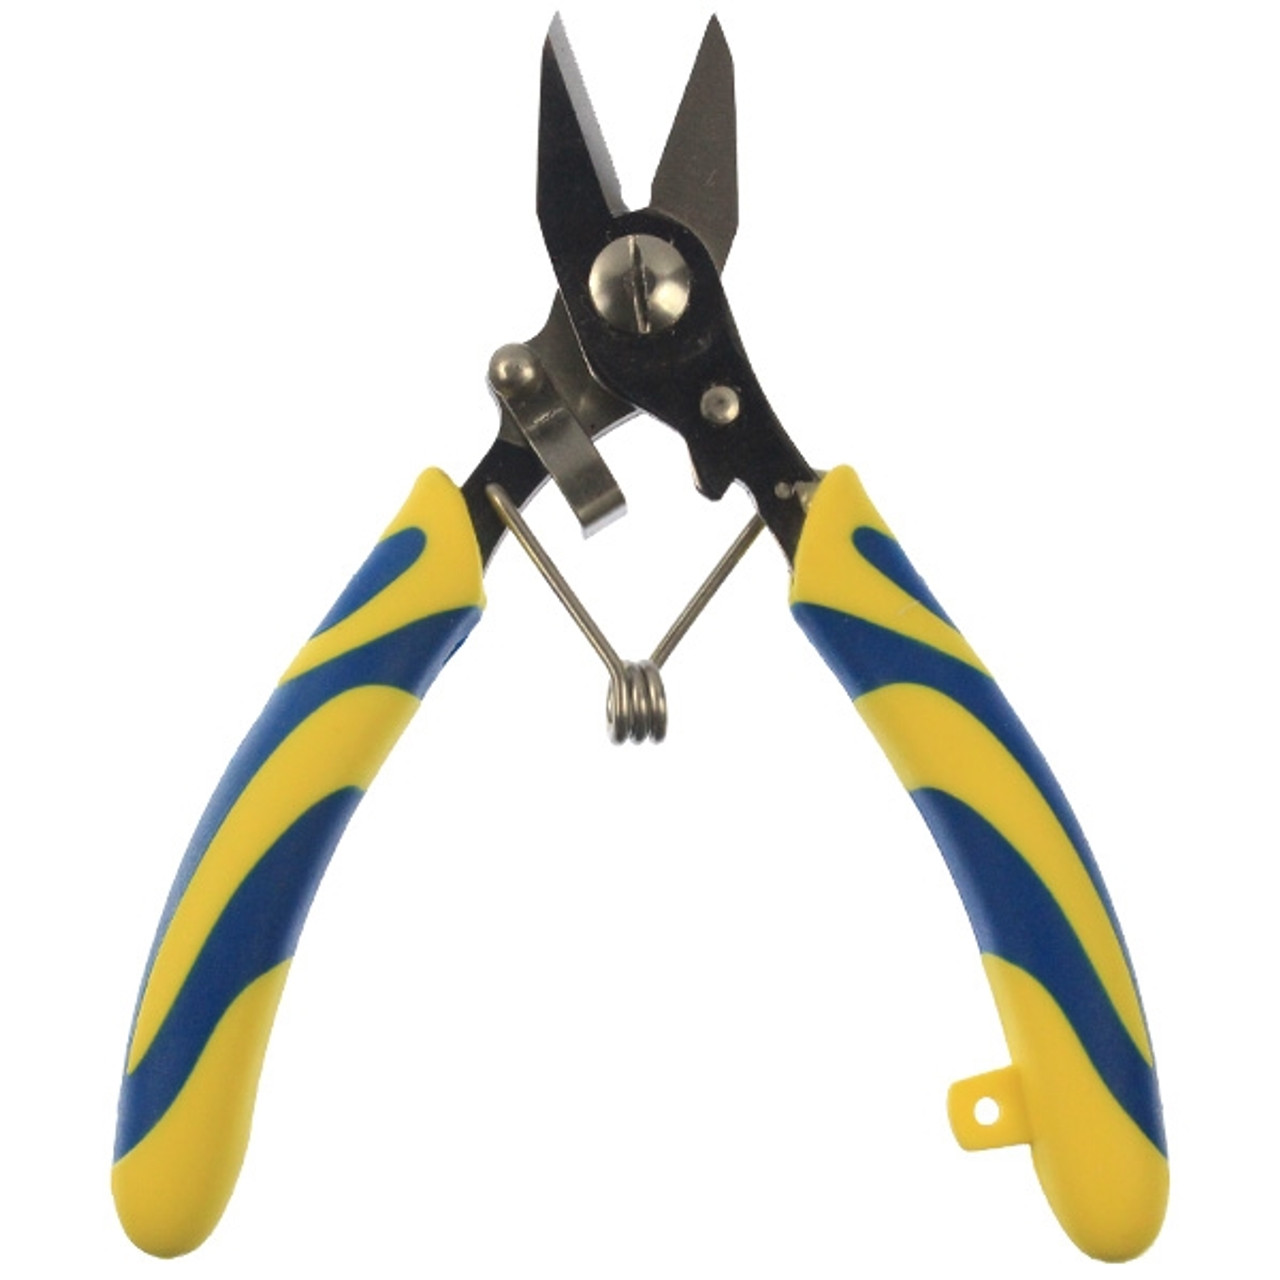 Pitbull Tackle Braided Line Cutter 2.0